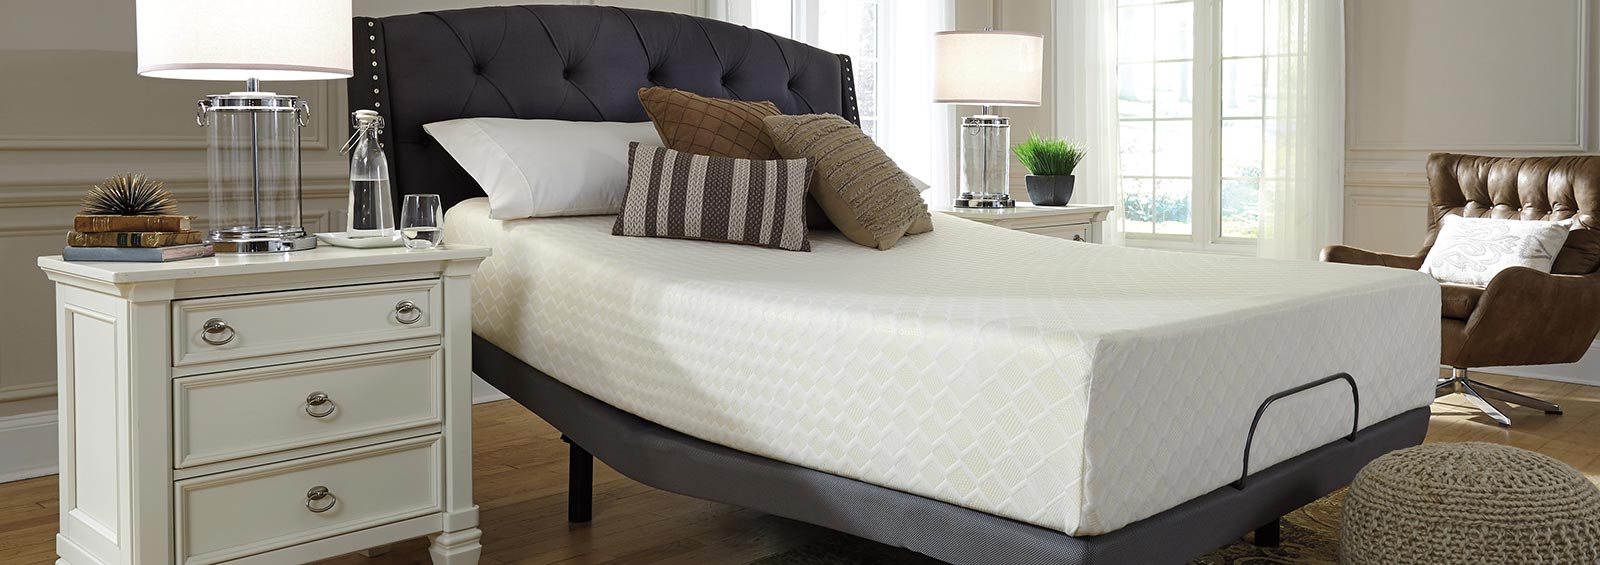 cls direct mattress home furniture and cabinets